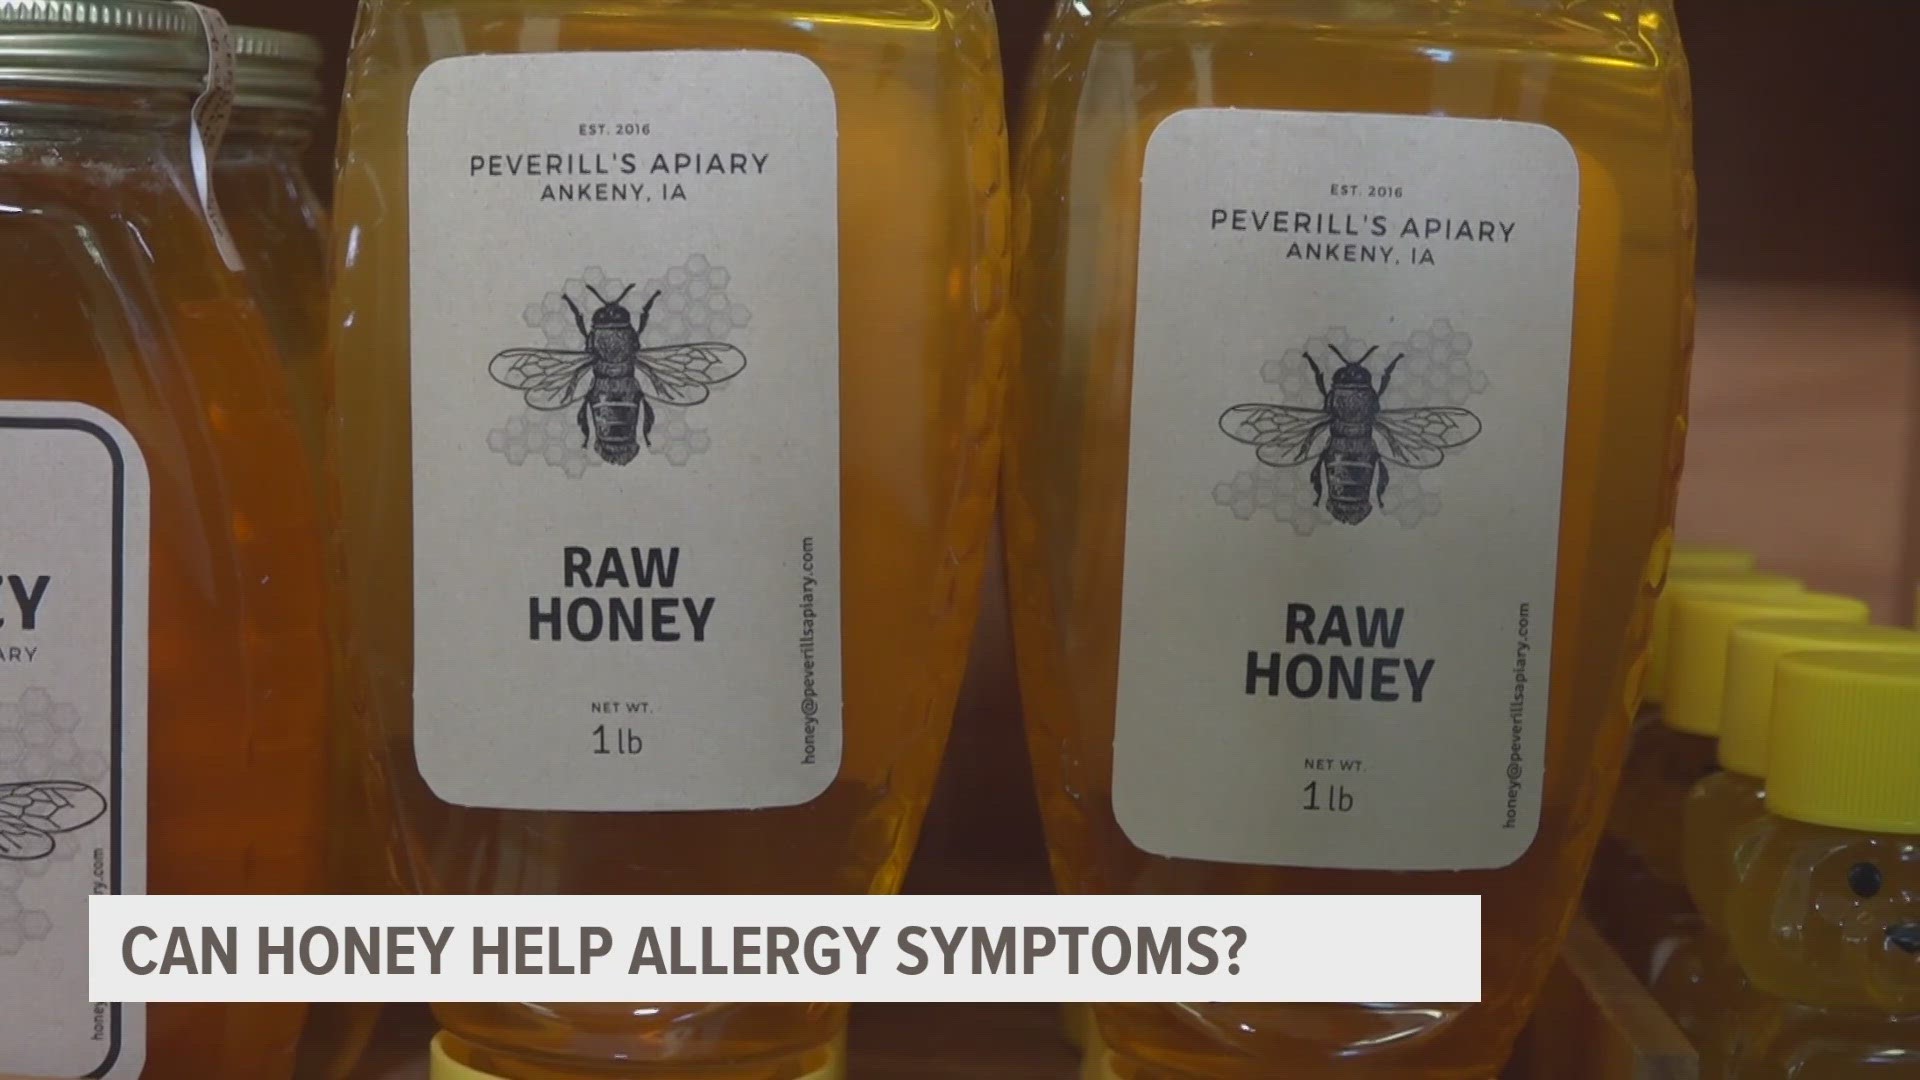 Researchers are divided on whether or not consuming local honey can limit allergy symptoms.